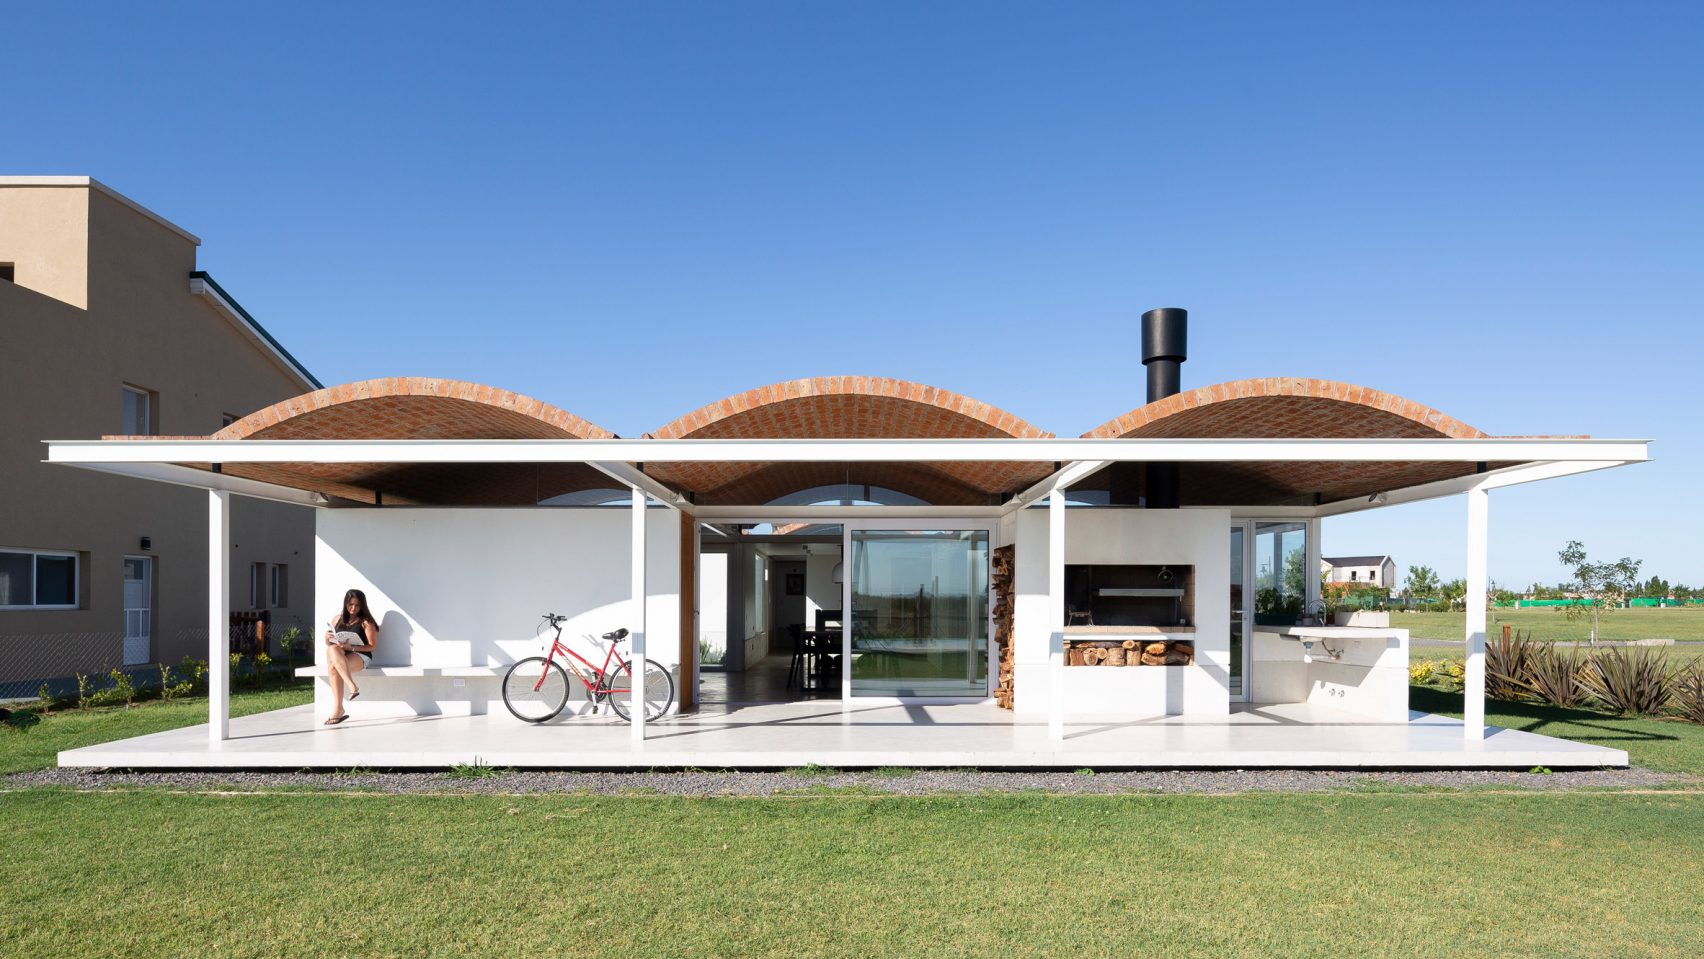 The Dezeen guide to roof design and architecture